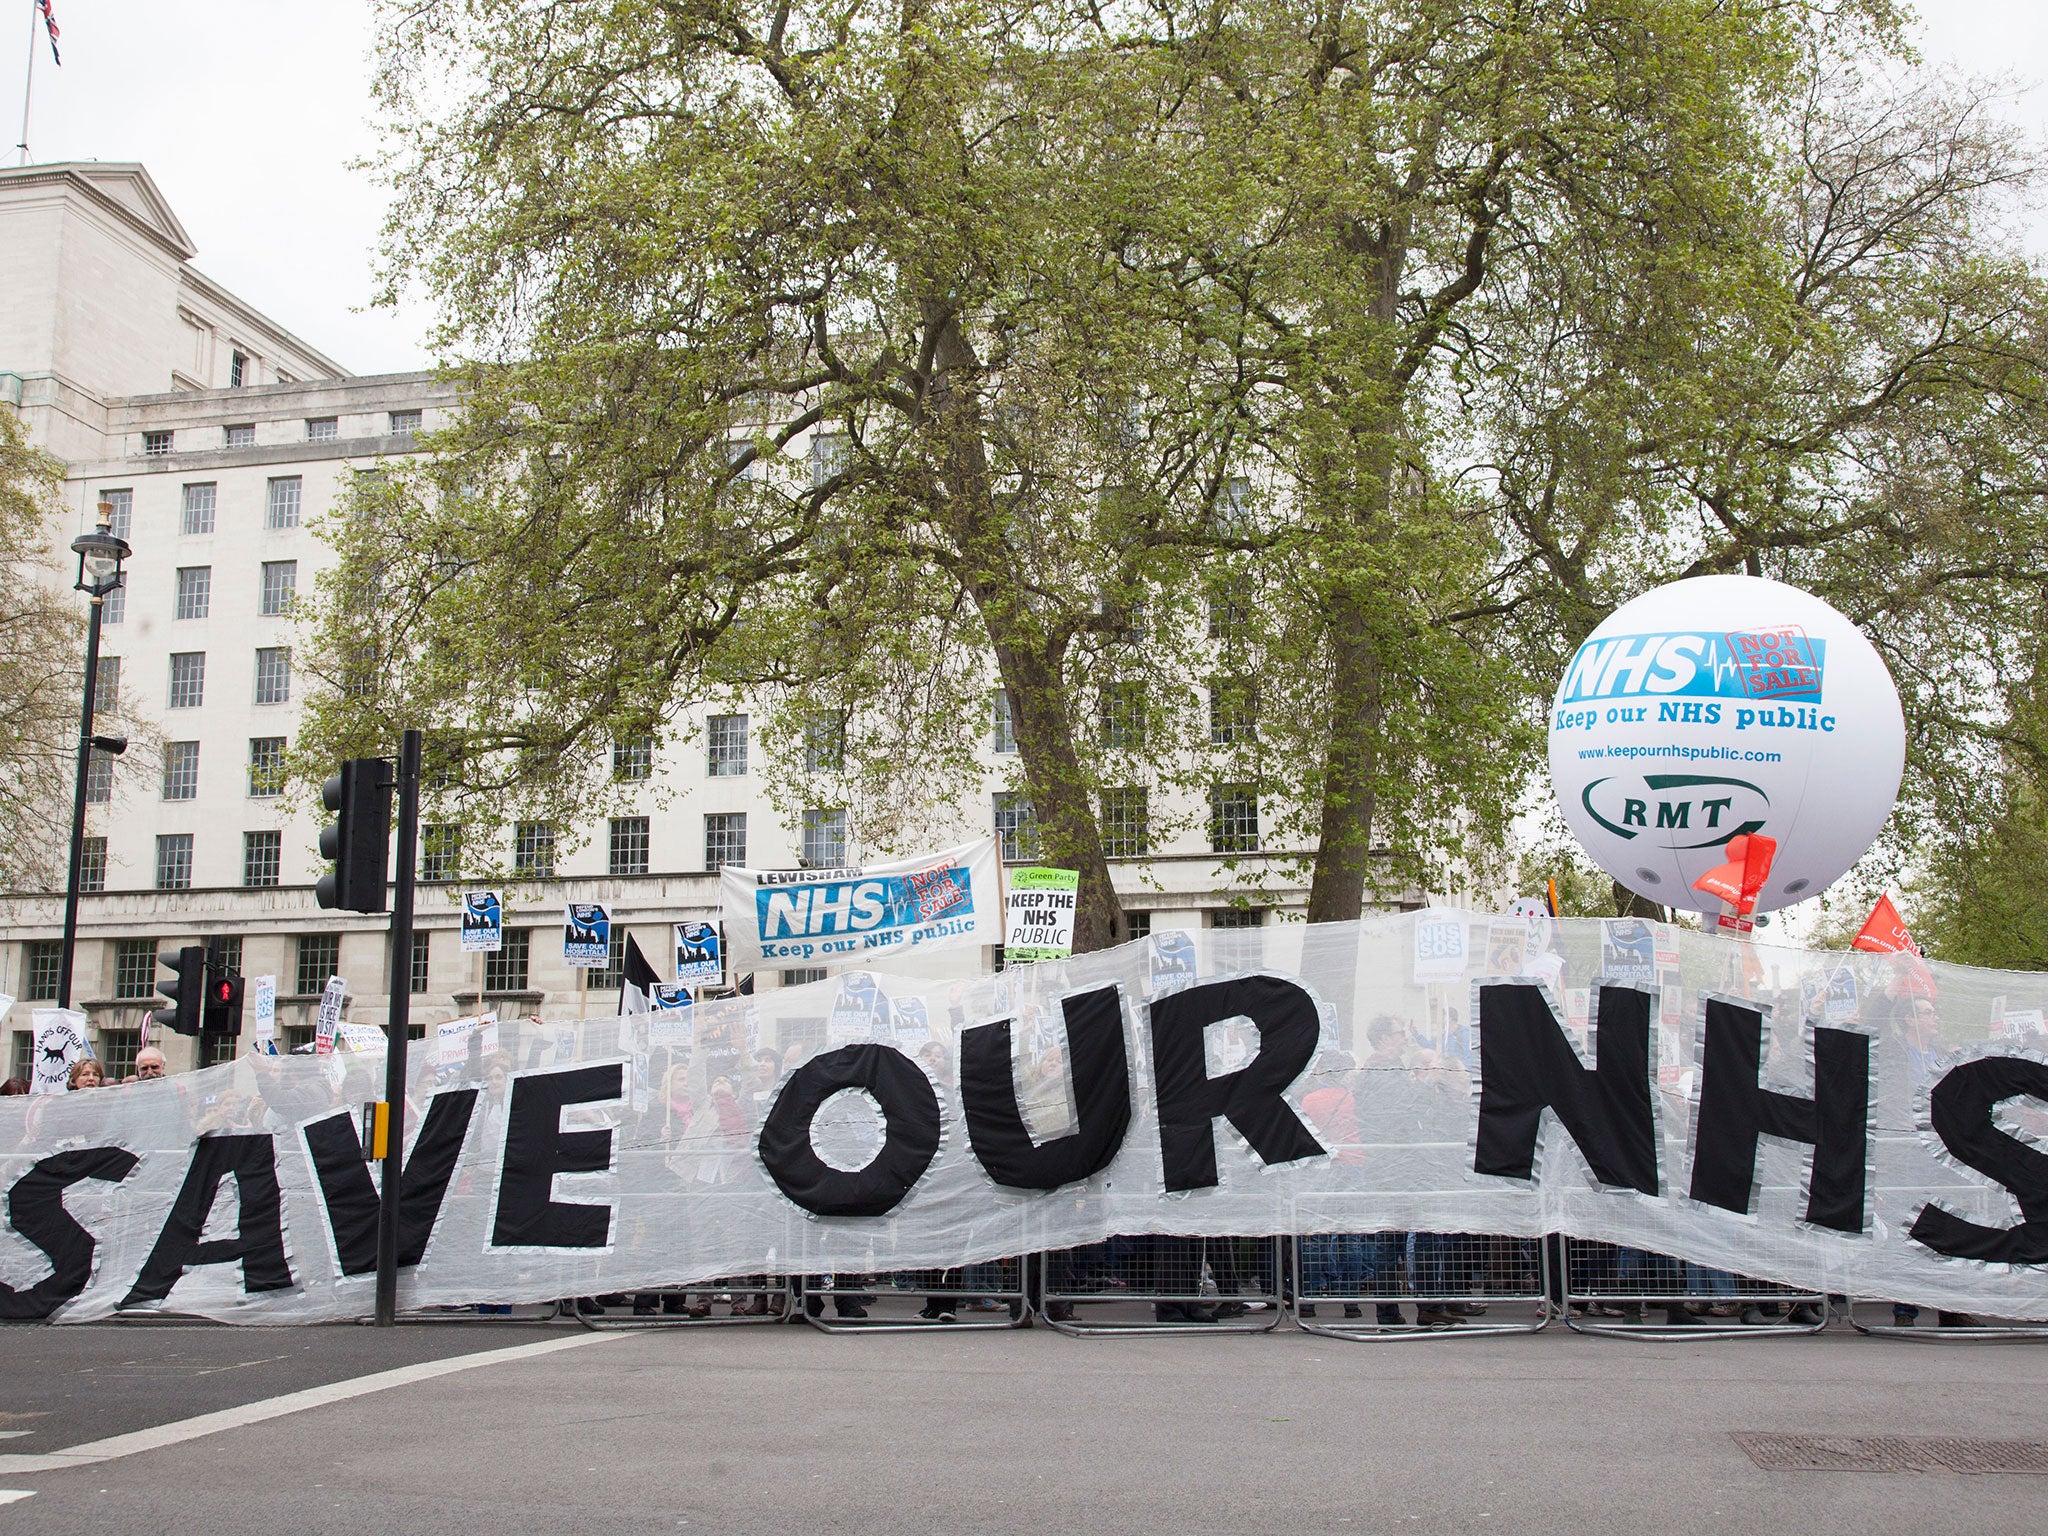 Protesters march in a demonstration against NHS funding cuts. NHS trusts will face a combined deficit of £2.5bn when the current financial year ends